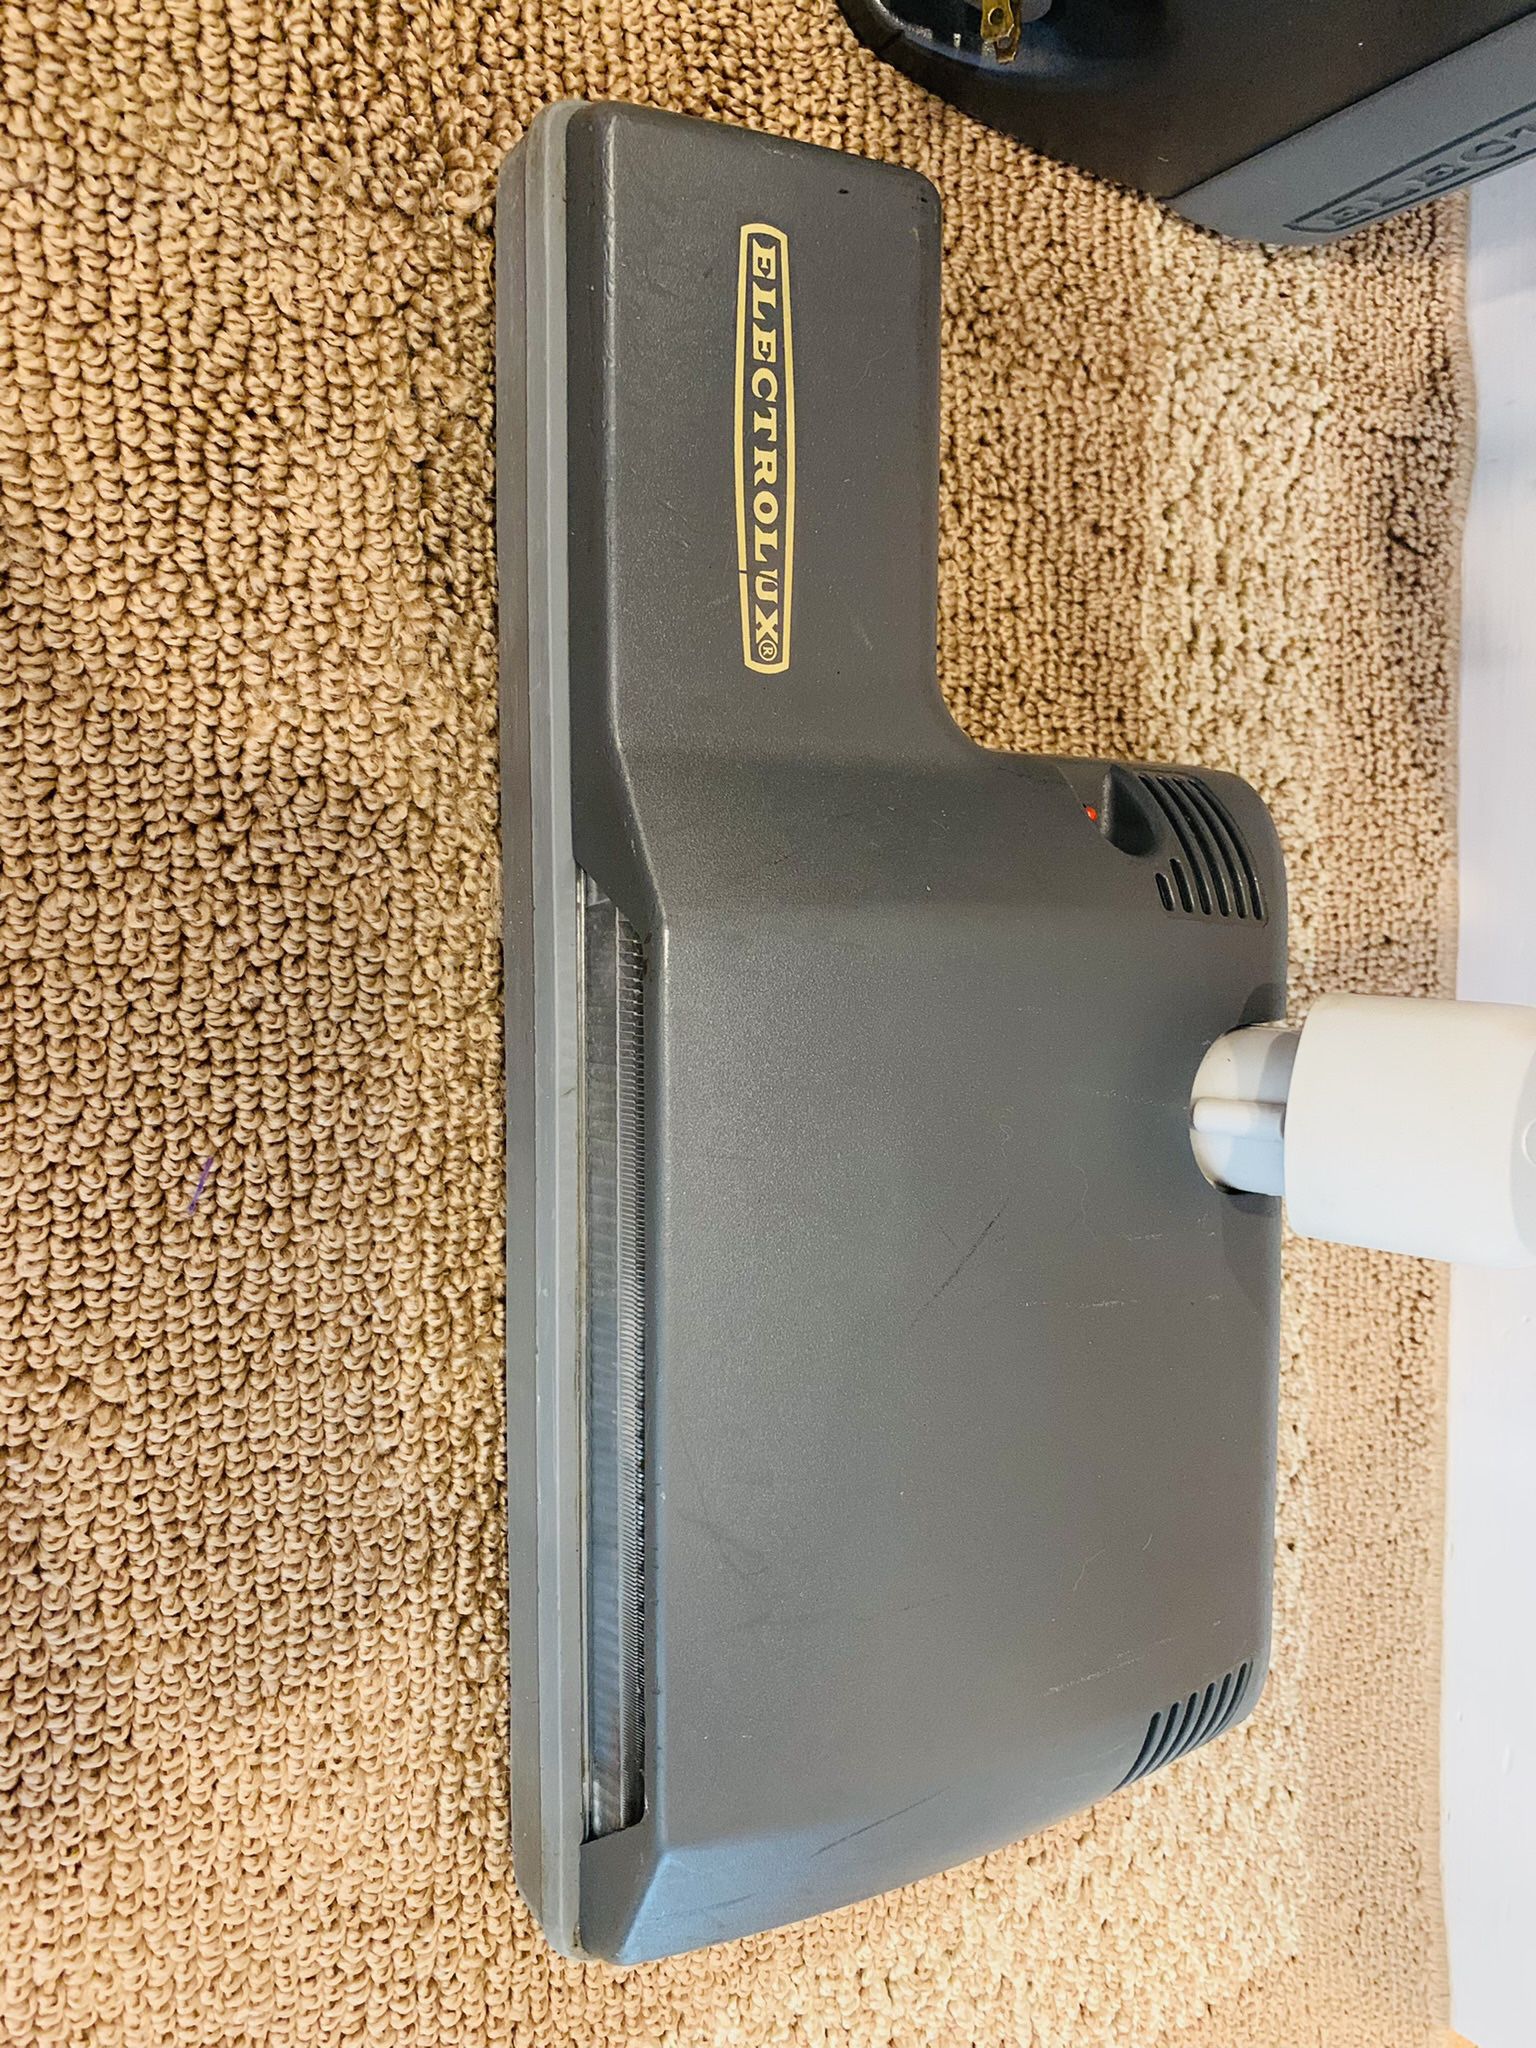 Electrolux renaissance canister vacuum cleaner